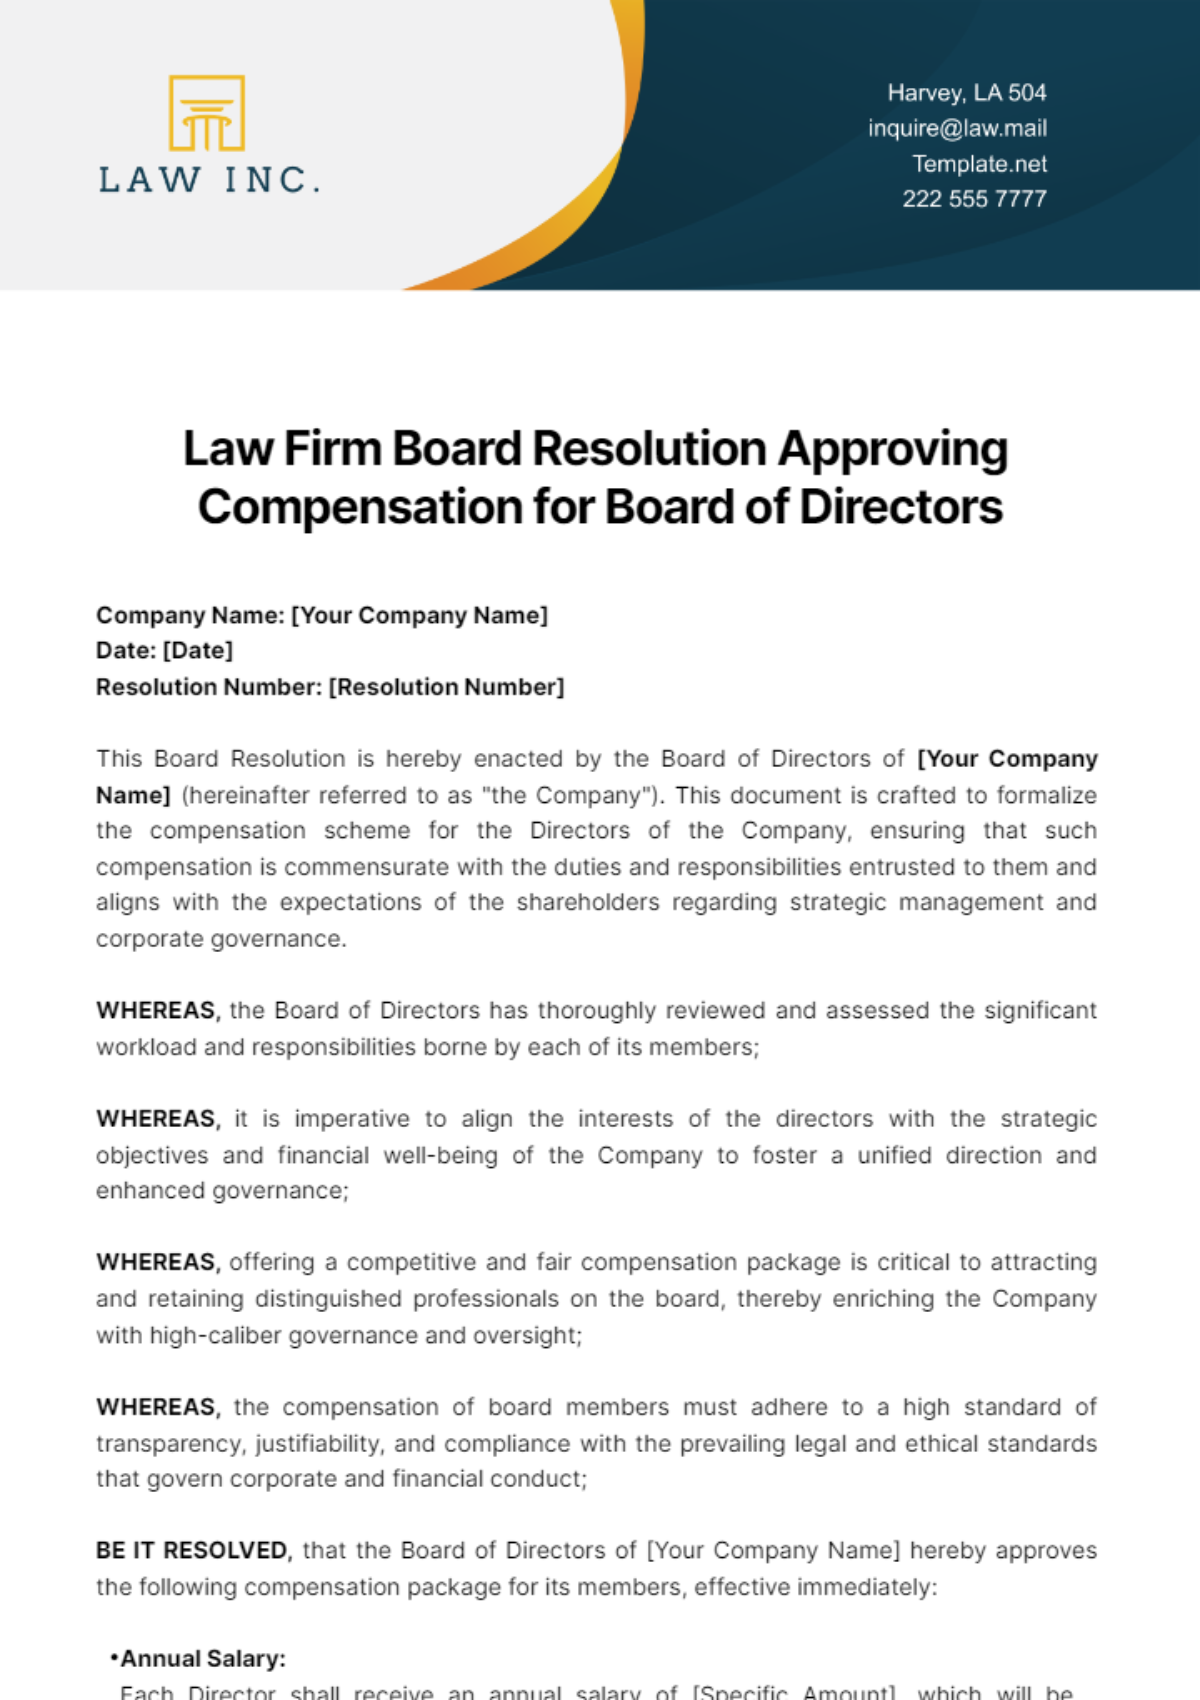 Law Firm Board Resolution Approving Compensation for Board of Directors Template